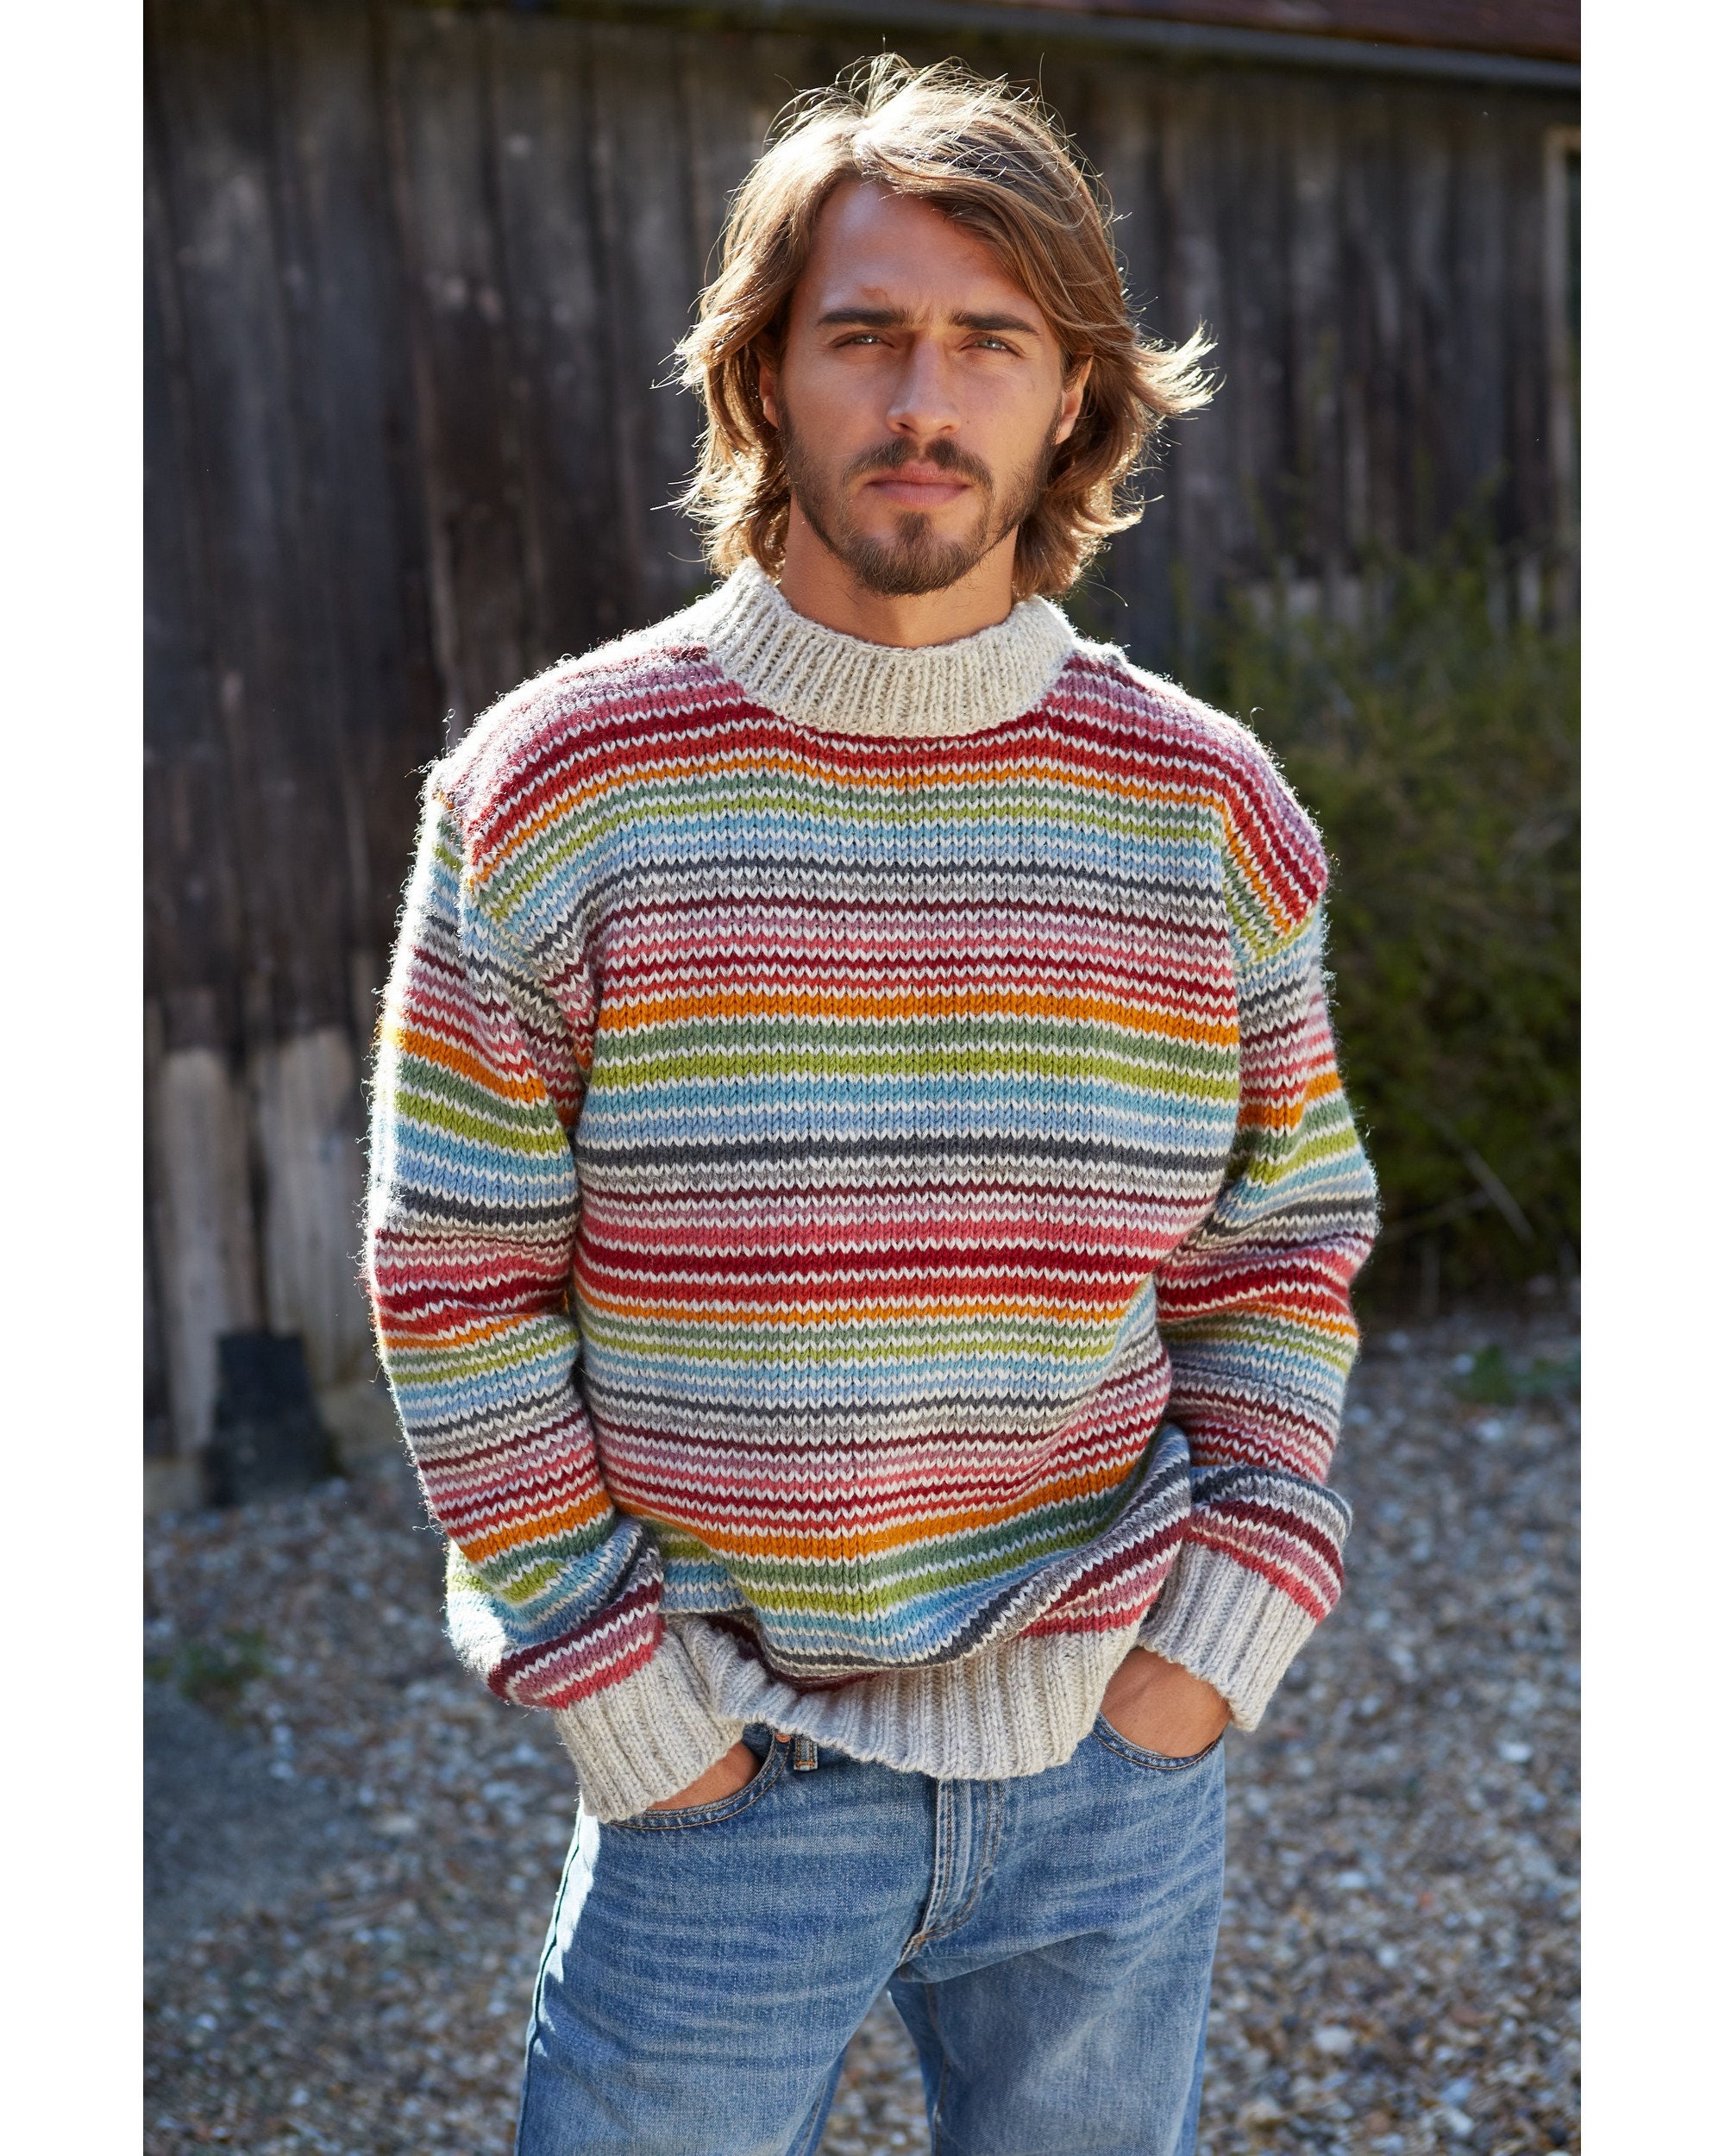 Unisex Cable Knit Striped Cardigan - Men's Sweaters & Sweatshirts